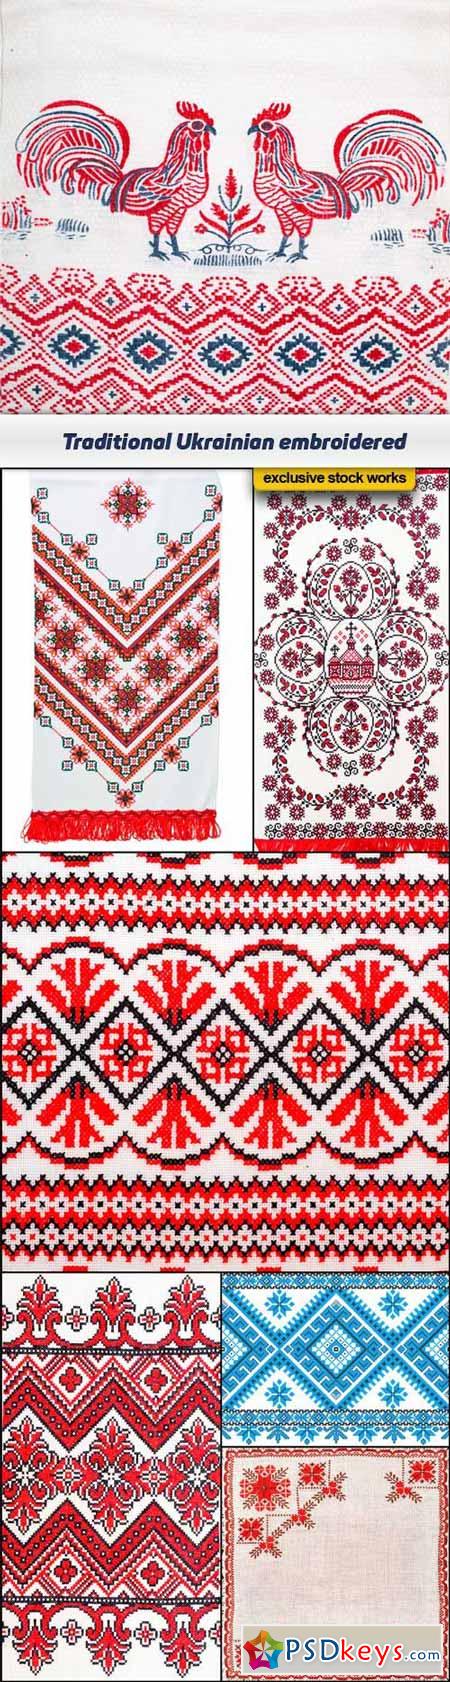 Traditional Ukrainian embroidered towel in red 7x JPEG